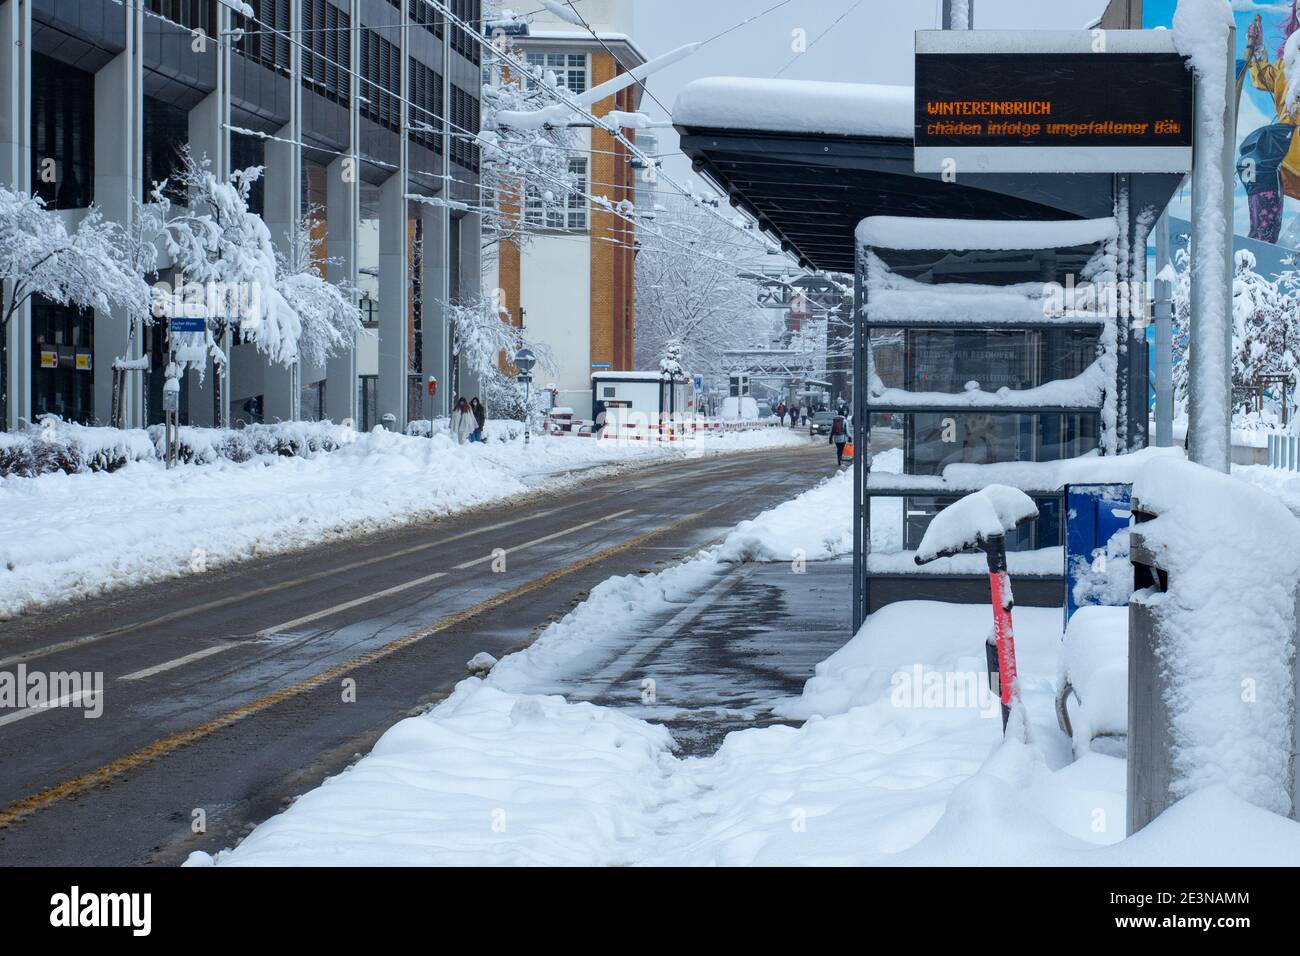 Zurich, Switzerland - January 15th 2021: Tram station out of service due to snow Stock Photo